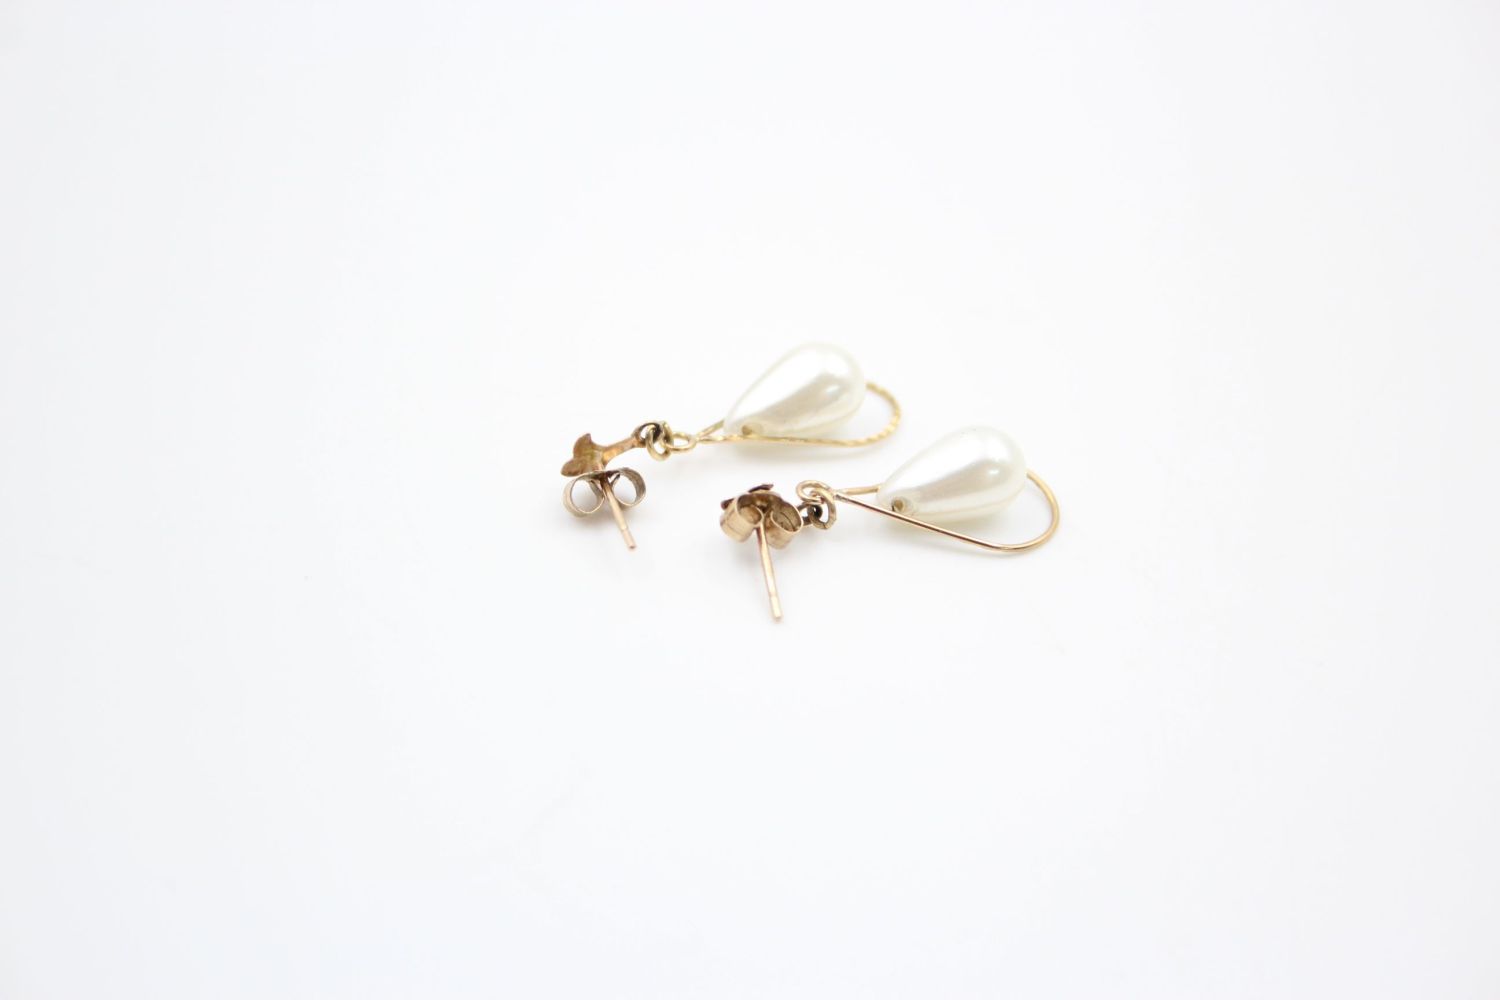 3 x 9ct gold faux pearl earrings 2.4 grams gross - Image 7 of 11